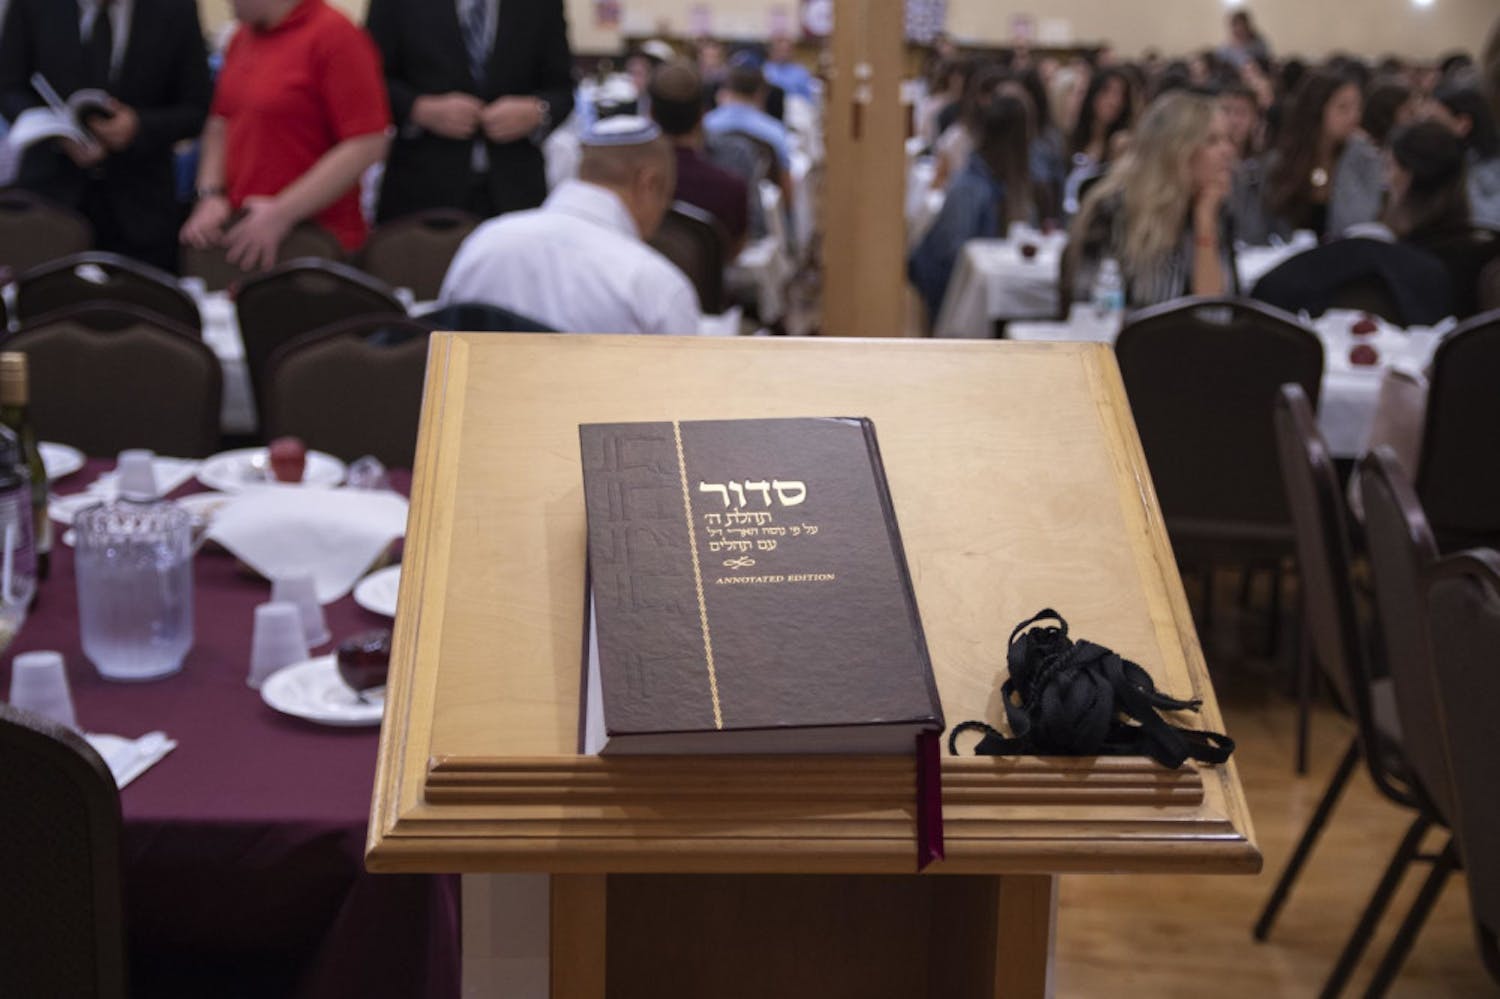 Prayer books are laid out at the Lubavitch Chabad Jewish Student and Community Center for the Rosh Hashanah service. Around 650 members of the community and students attended the holiday service Sunday night.